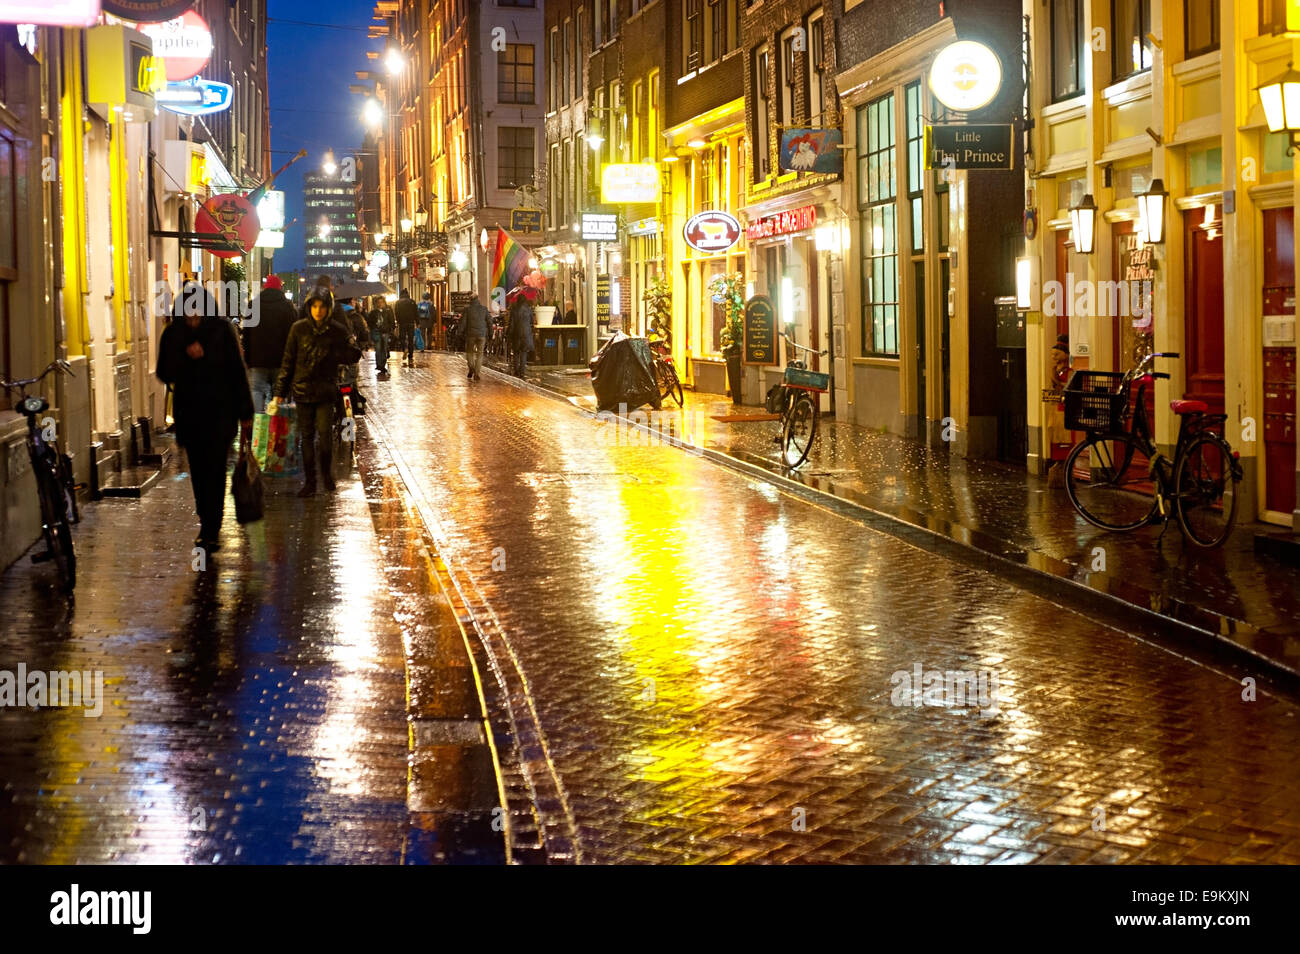 Unidentified people on the street of an old town of Amsterdam in the evening under the rain Stock Photo